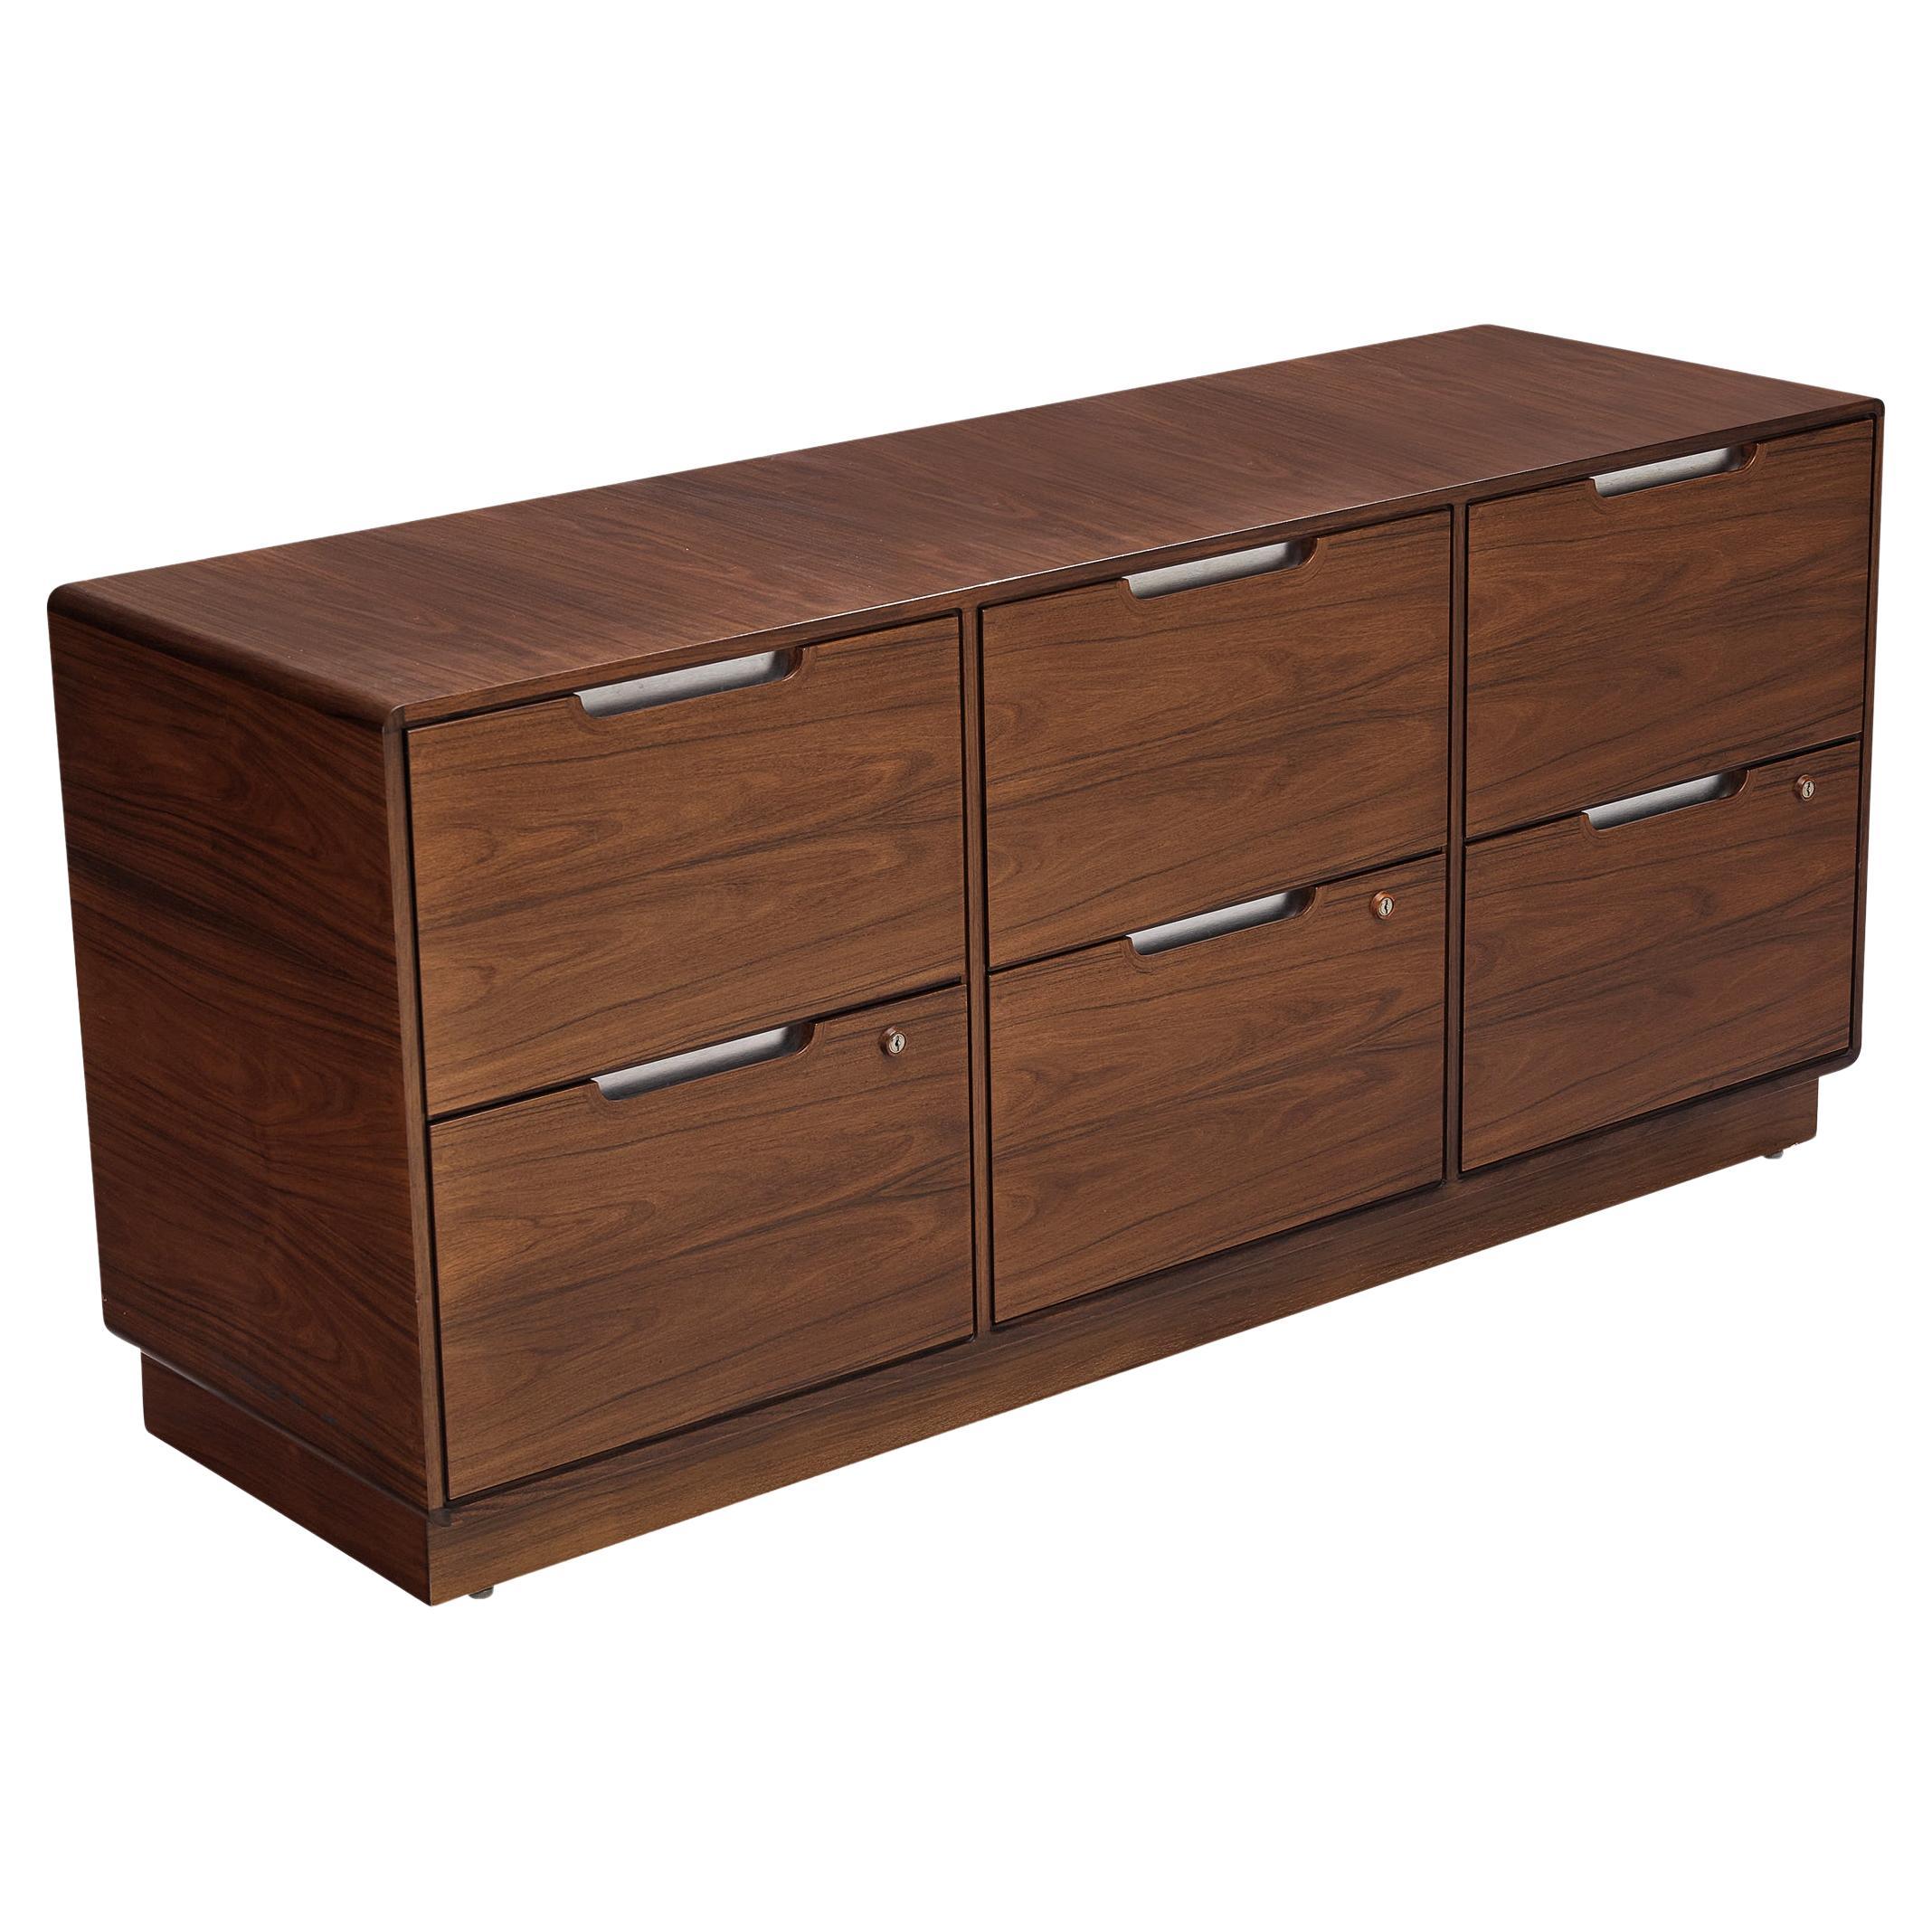 Posborg & Meyhoff for Sibast Møbler Cabinet with Six Drawers in Pau Ferro  For Sale